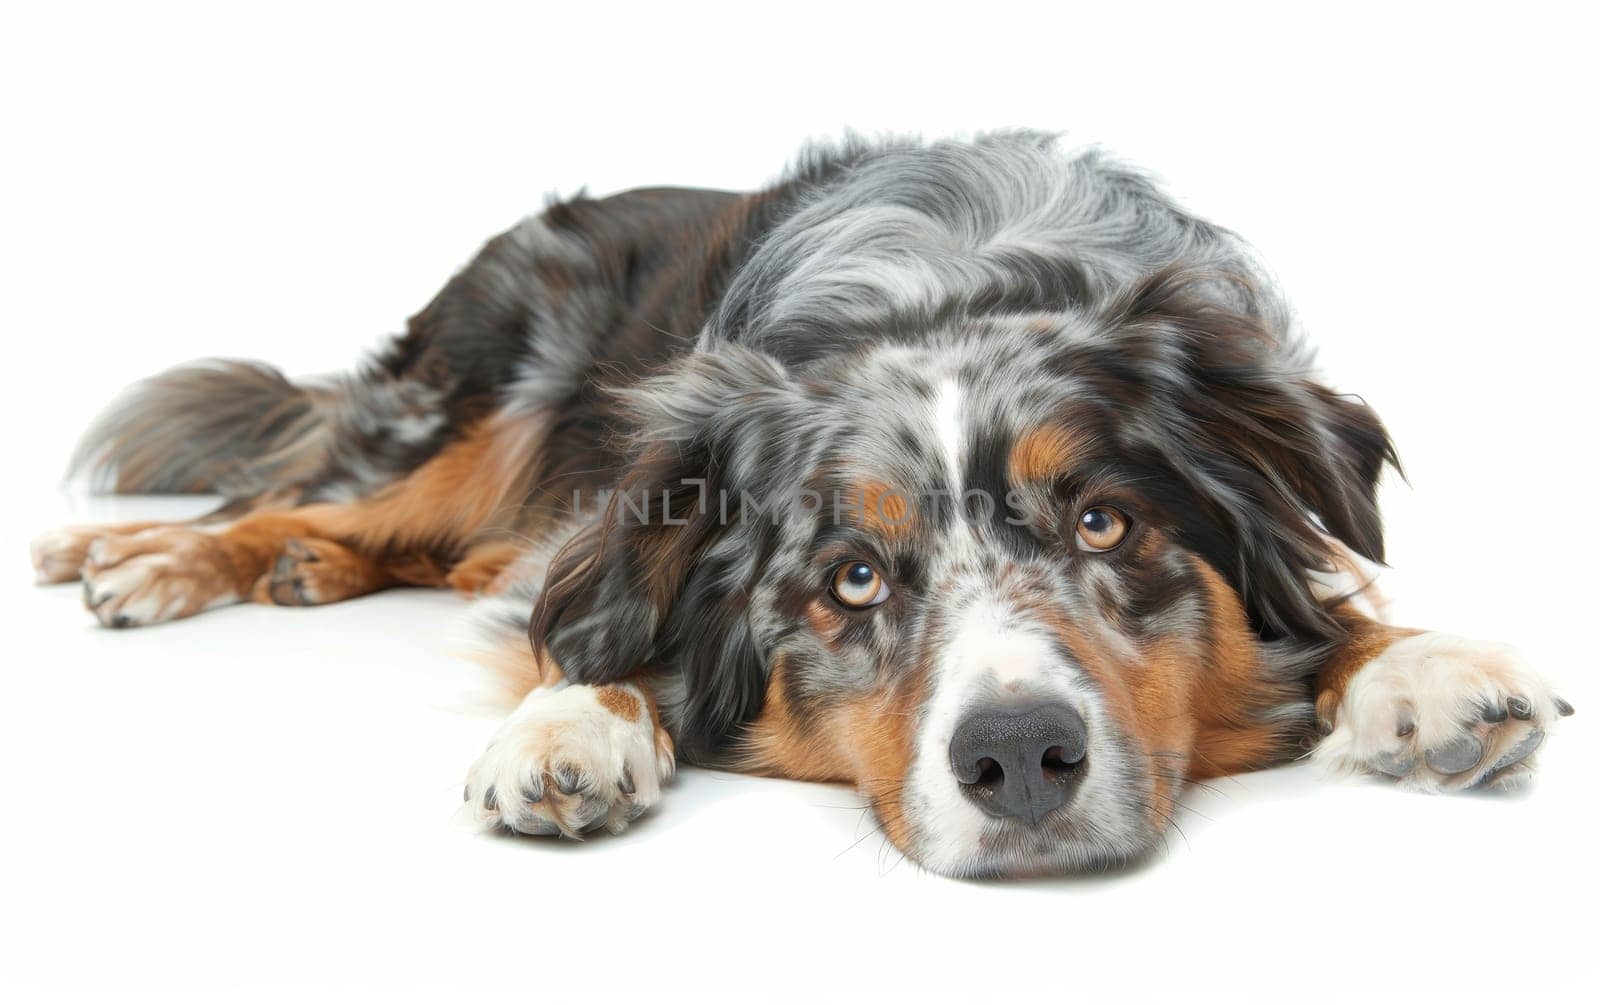 A laid-back Australian Shepherd lounges, its captivating gaze inviting interaction. The dog's merle coat pattern is rich in detail and texture